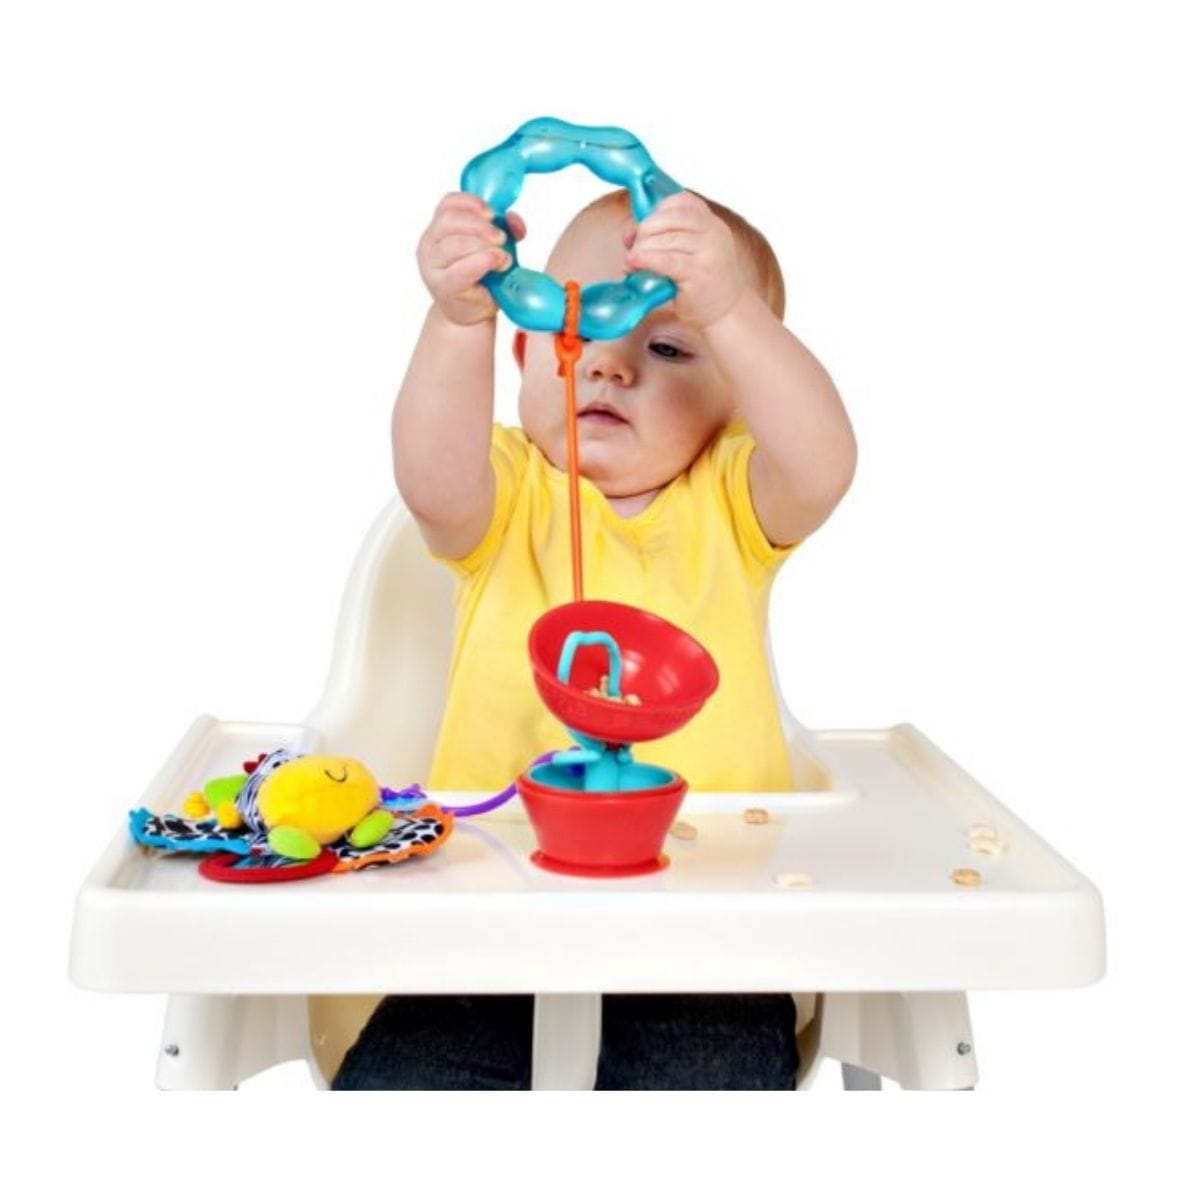 Grapple Toy Tether Grapple Toy Tether 